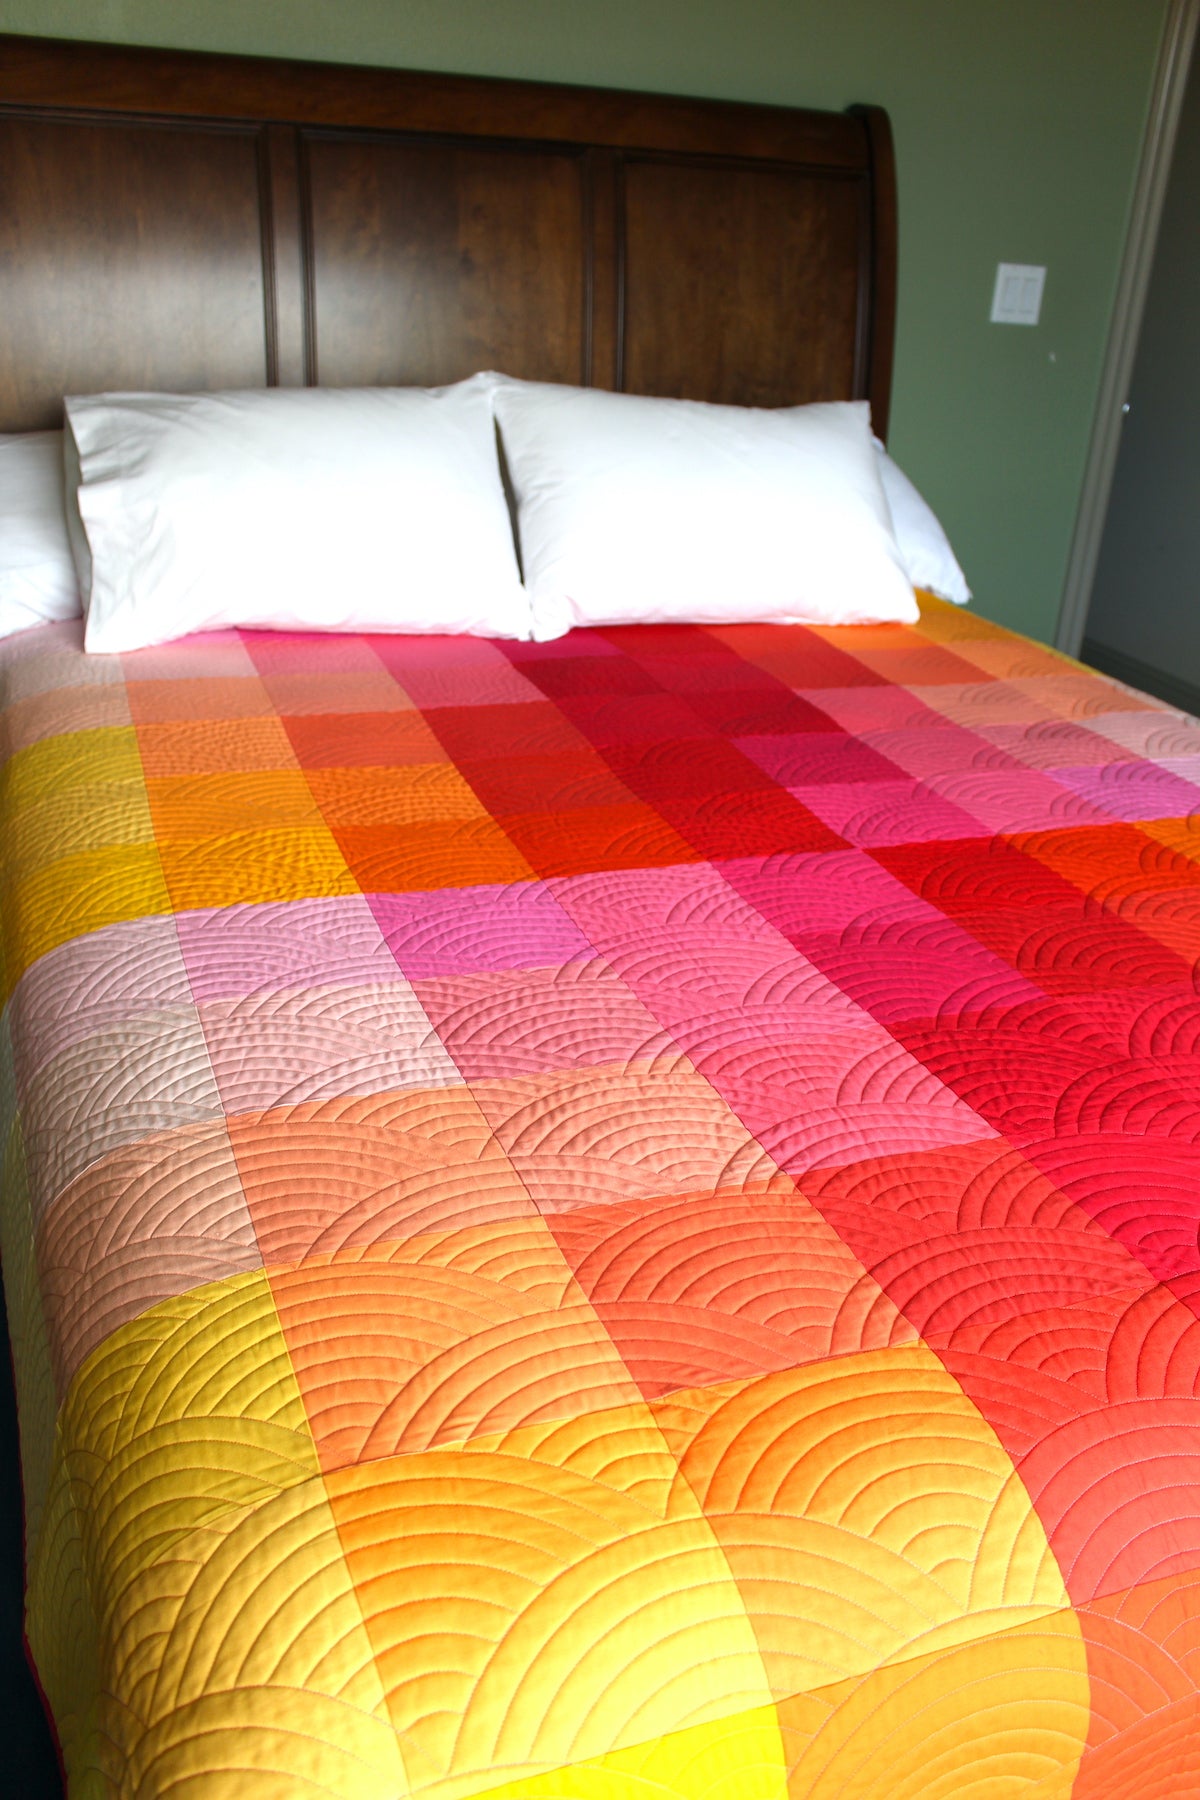 Gradient Grid Quilt: YRM - Sewfinity